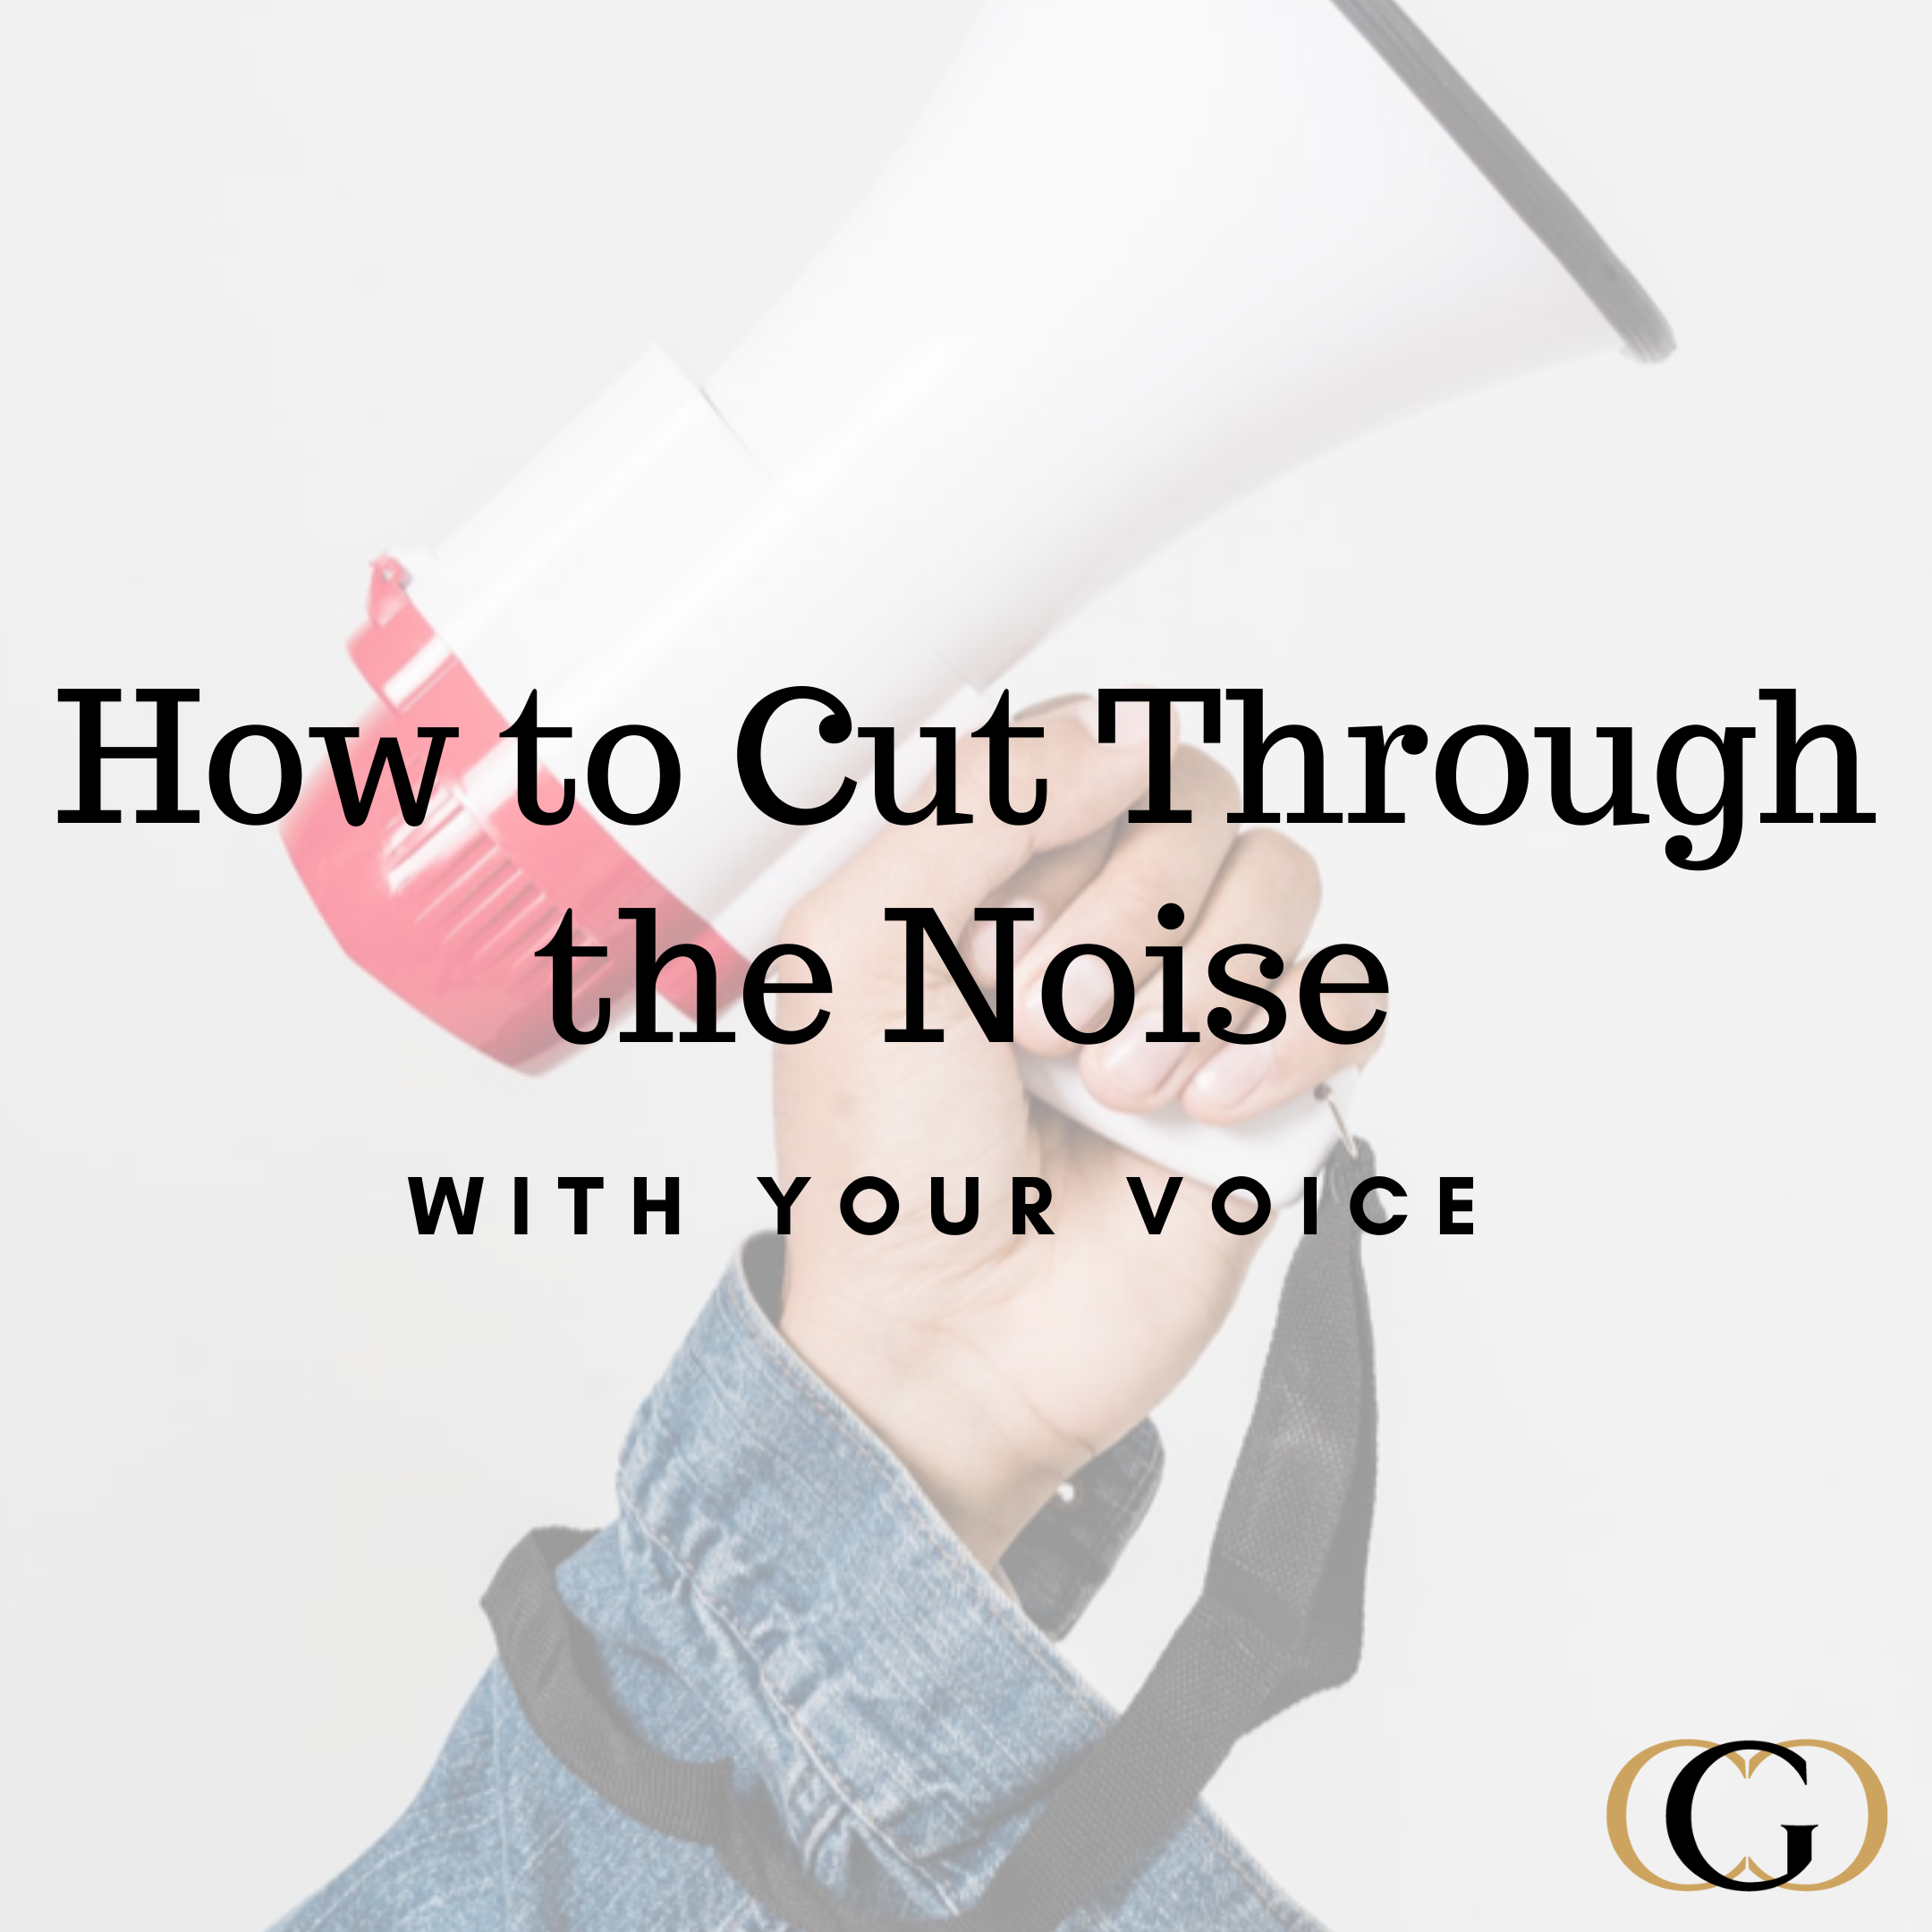 How to Cut Through the Noise with Your Voice